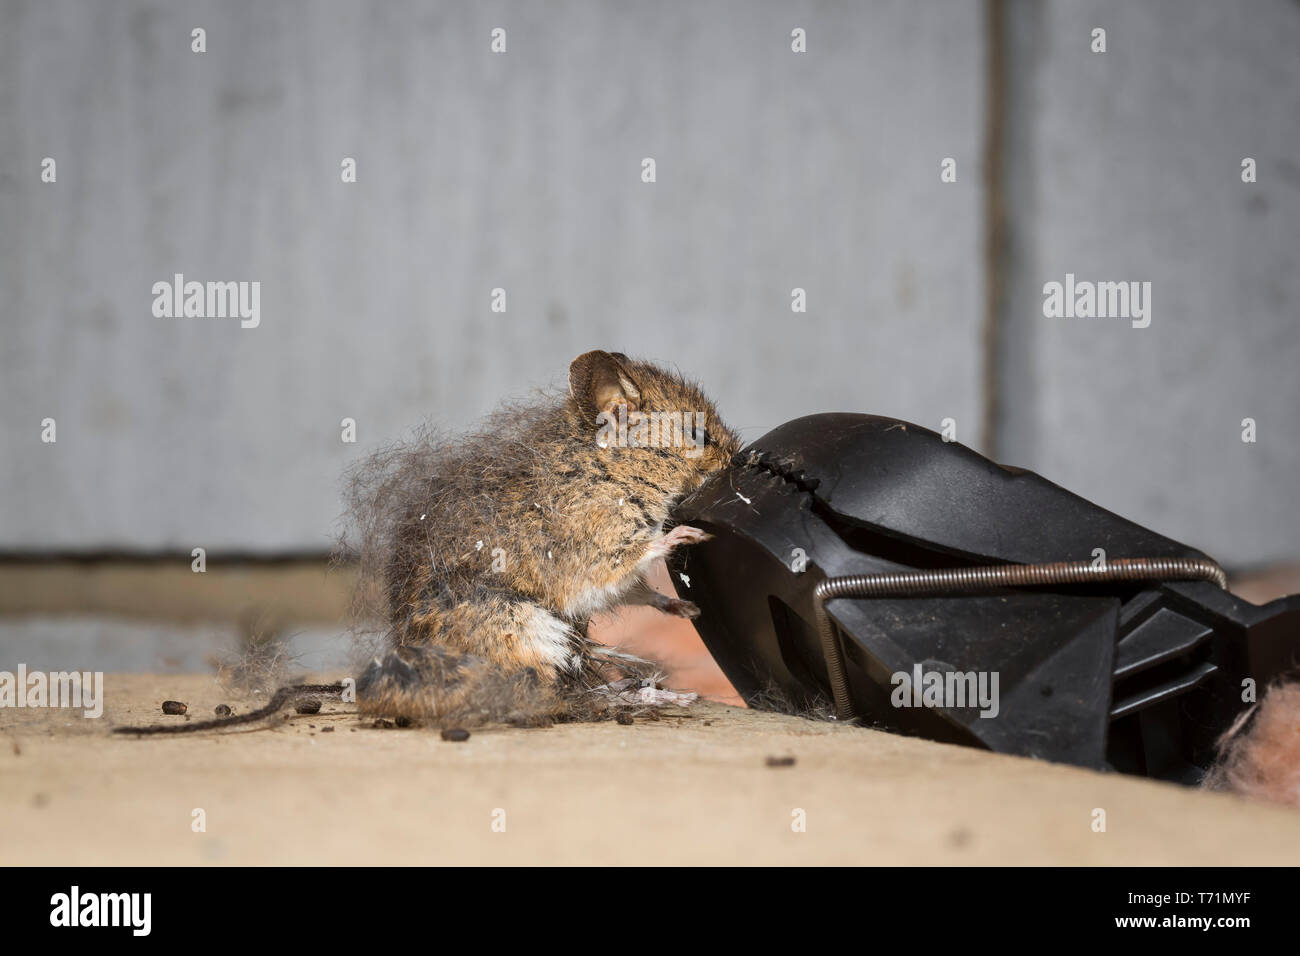 https://c8.alamy.com/comp/T71MYF/a-small-brown-mouse-caught-by-its-nose-in-a-mouse-trap-in-a-loft-or-attic-T71MYF.jpg